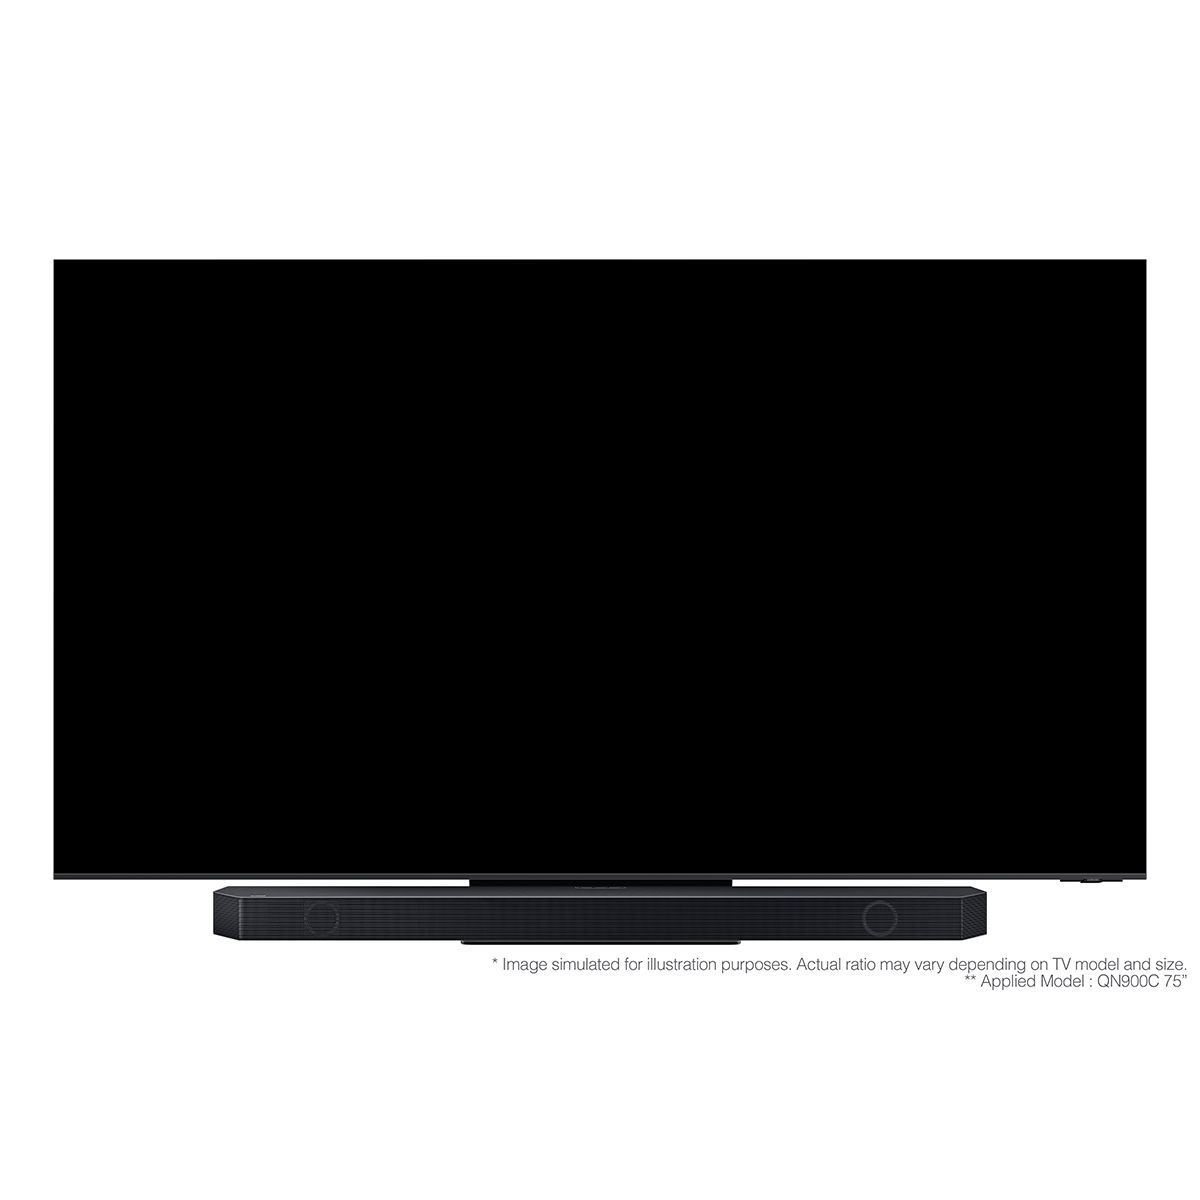 Samsung Q990C 11.1.4 ch. Wireless Dolby ATMOS Soundbar - front view with sample 75" QN900C television